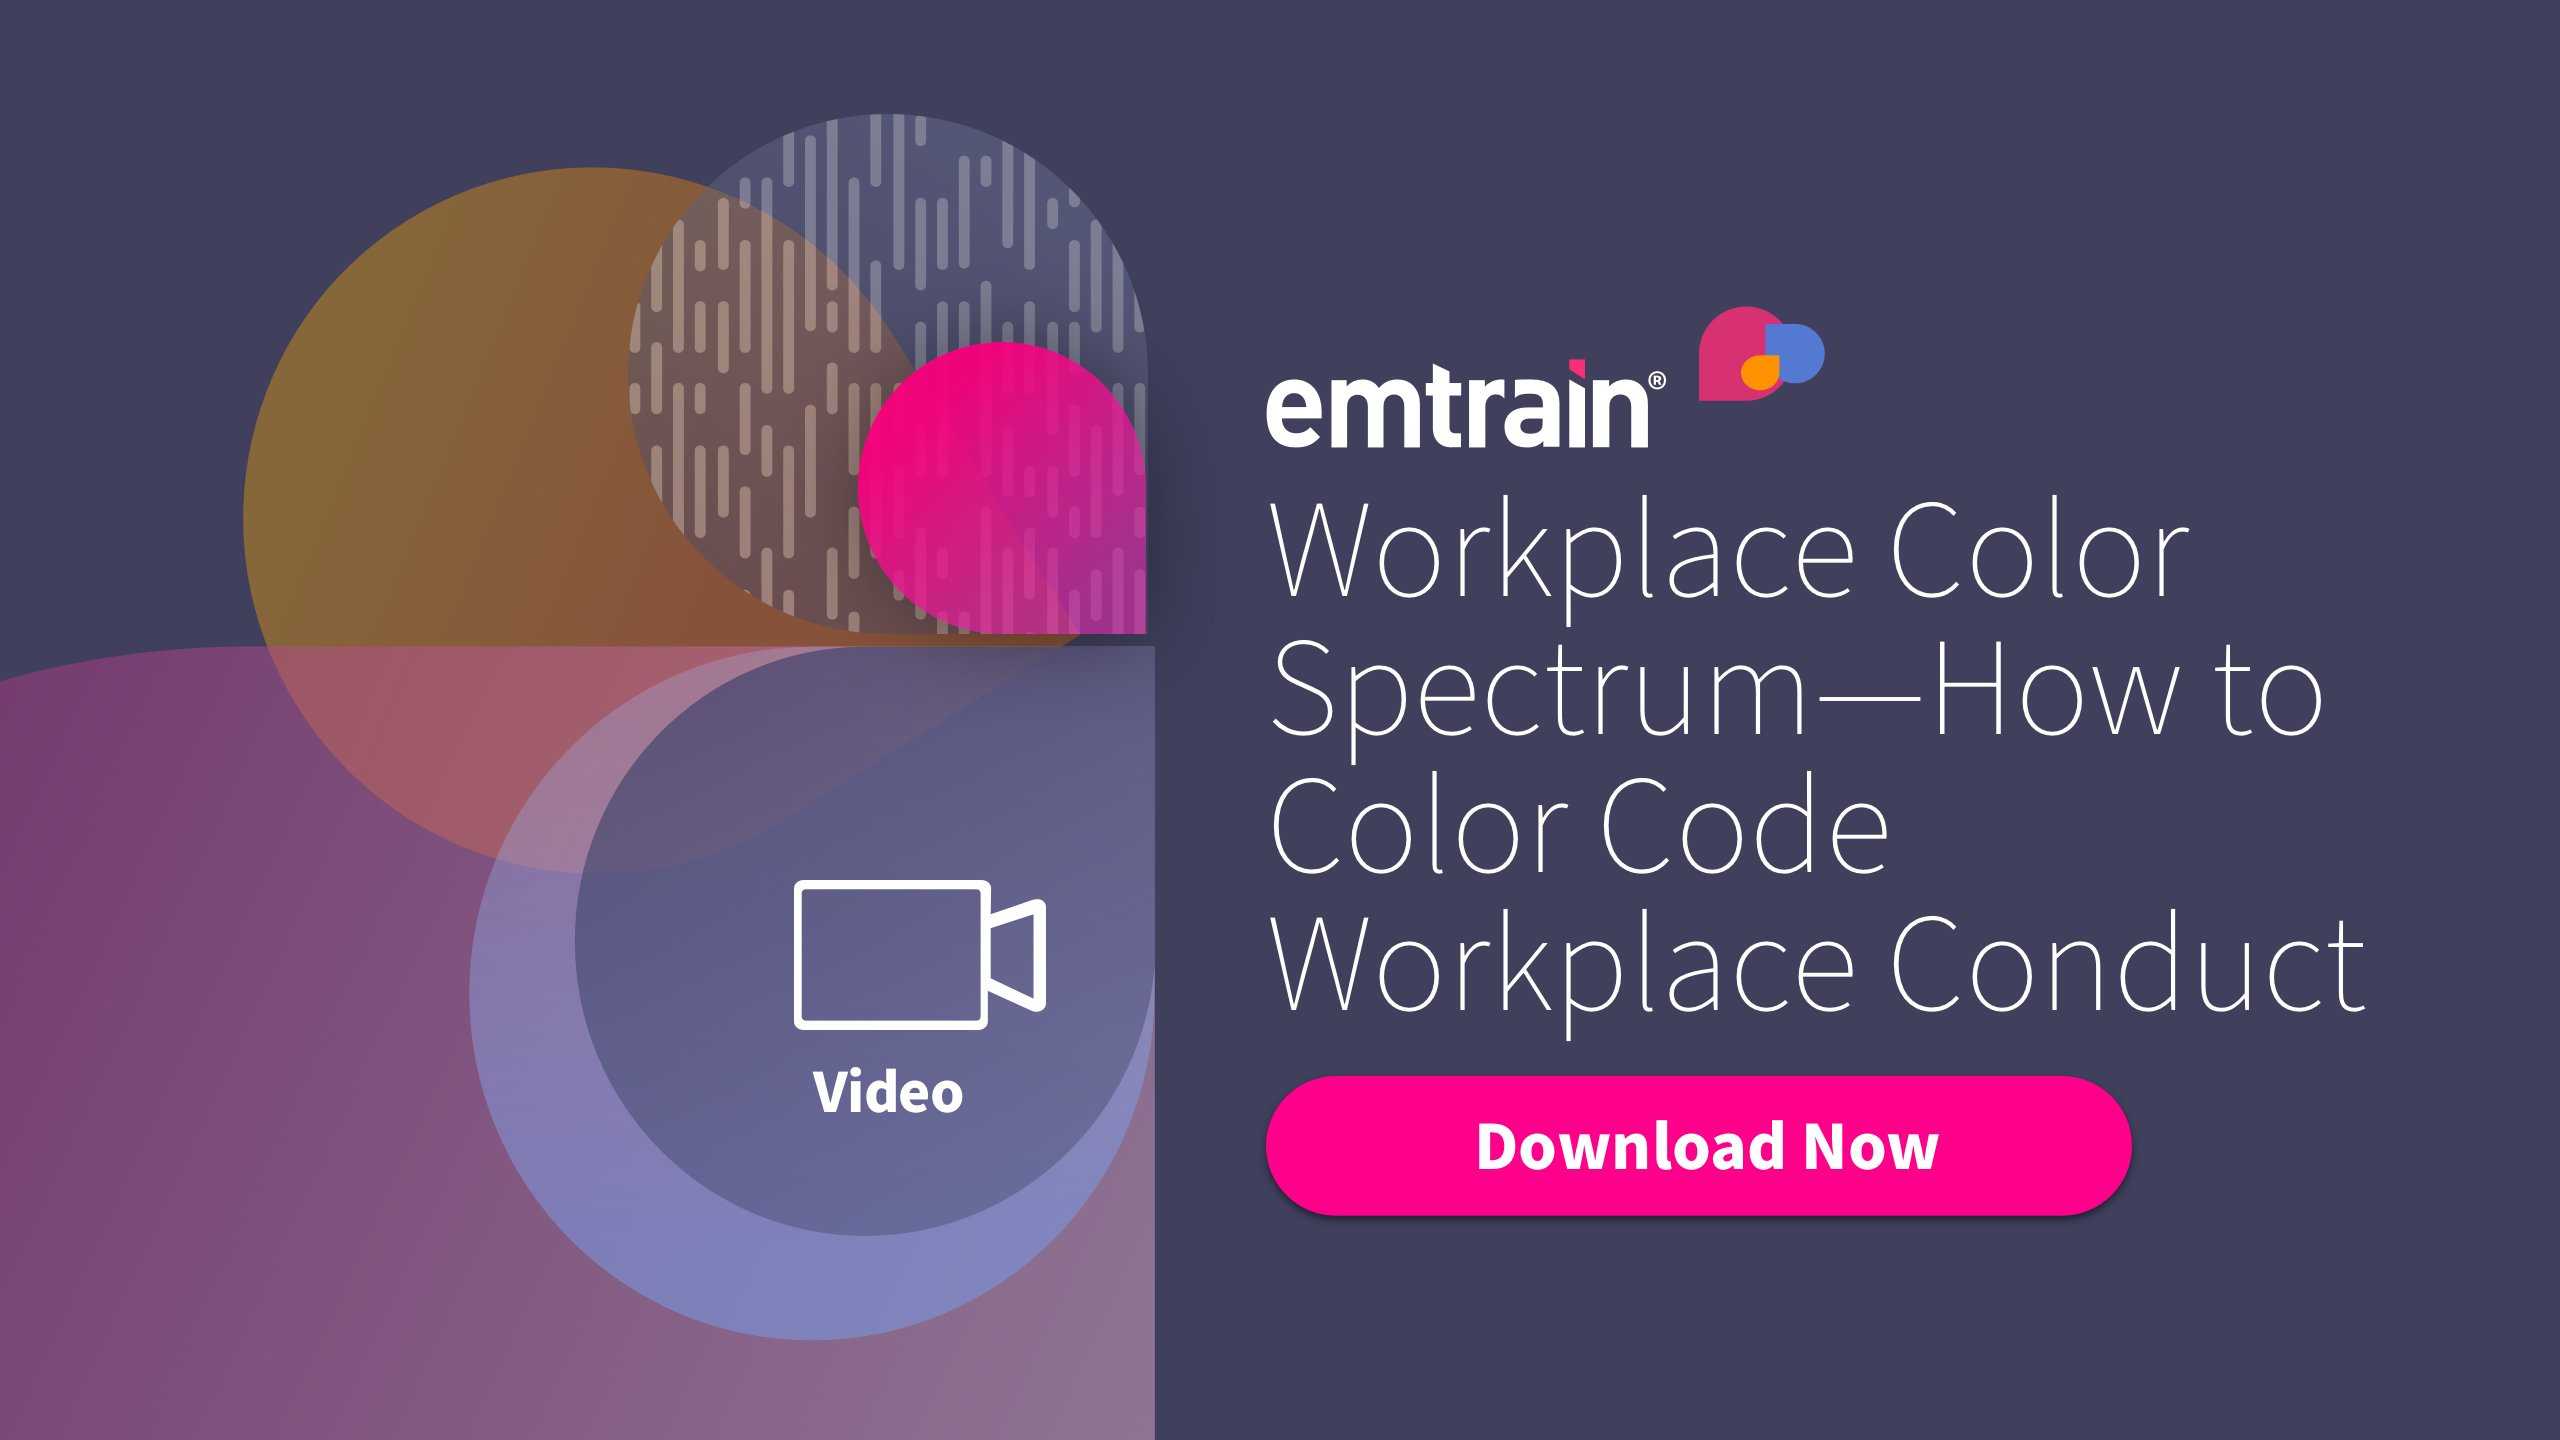 Workplace Color Spectrum—How to Color Code Workplace Conduct